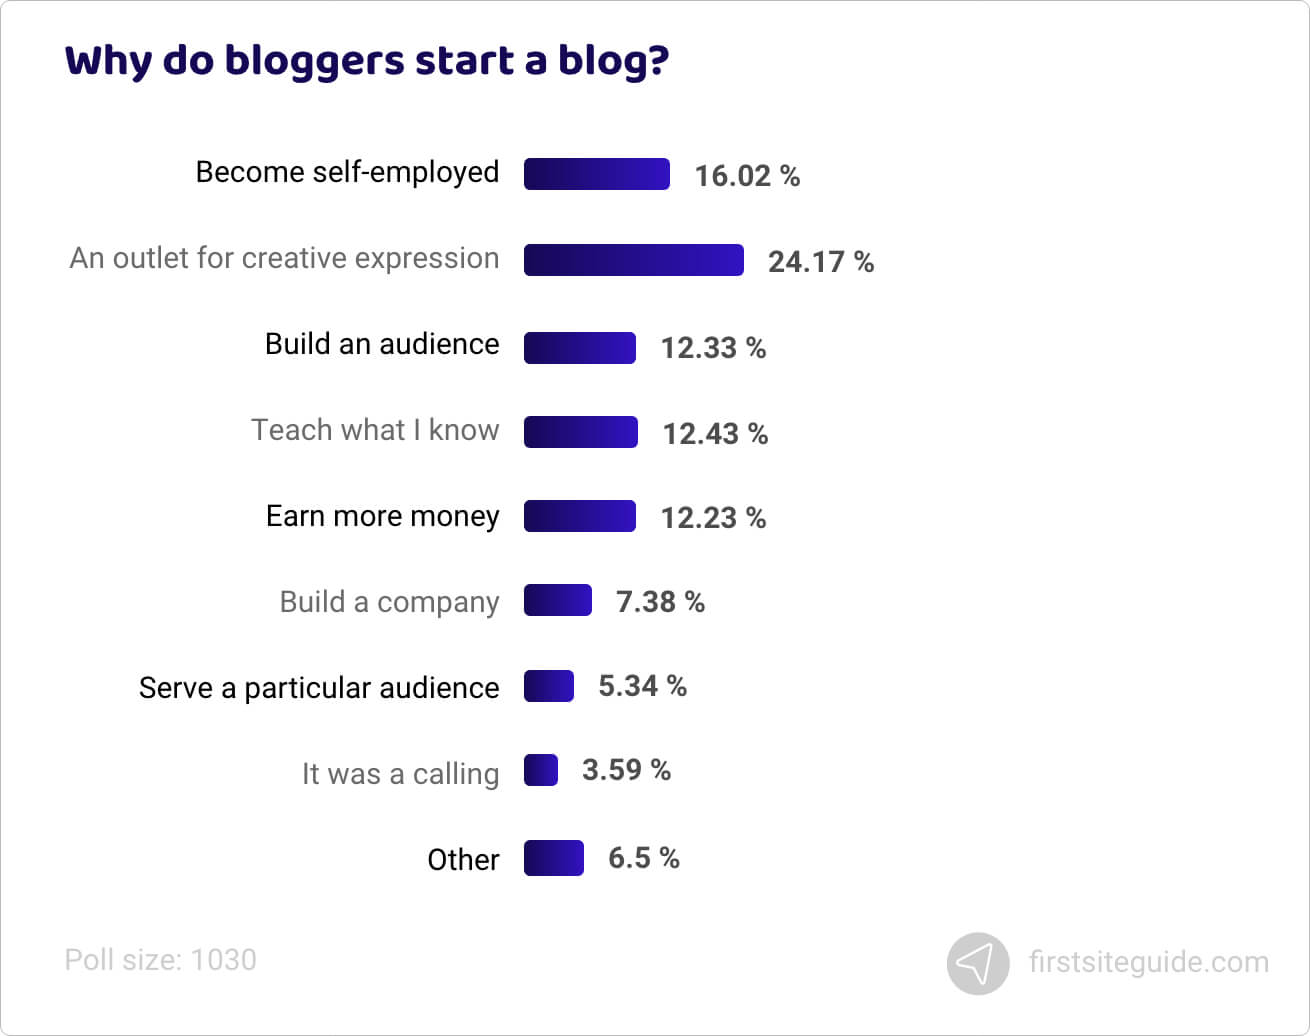 Why do bloggers start a blog